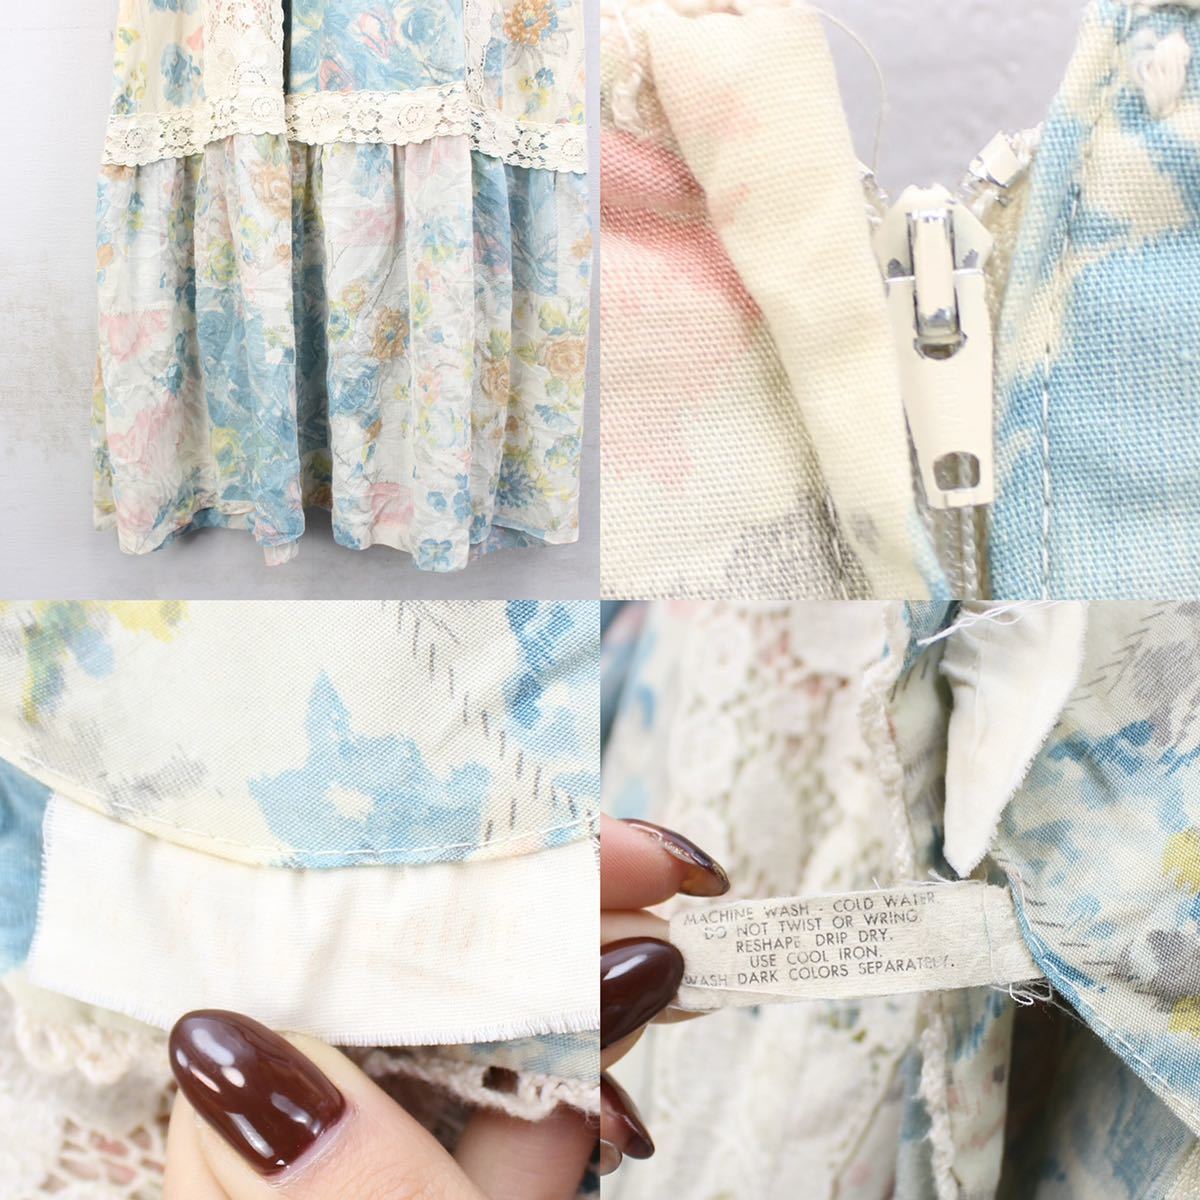 *SPECIAL ITEM 70's USA VINTAGE FLOWER PATTERNED LACE DRESS ONE PIECE/70年代アメリカ古着花柄レースドレスワンピース_画像10